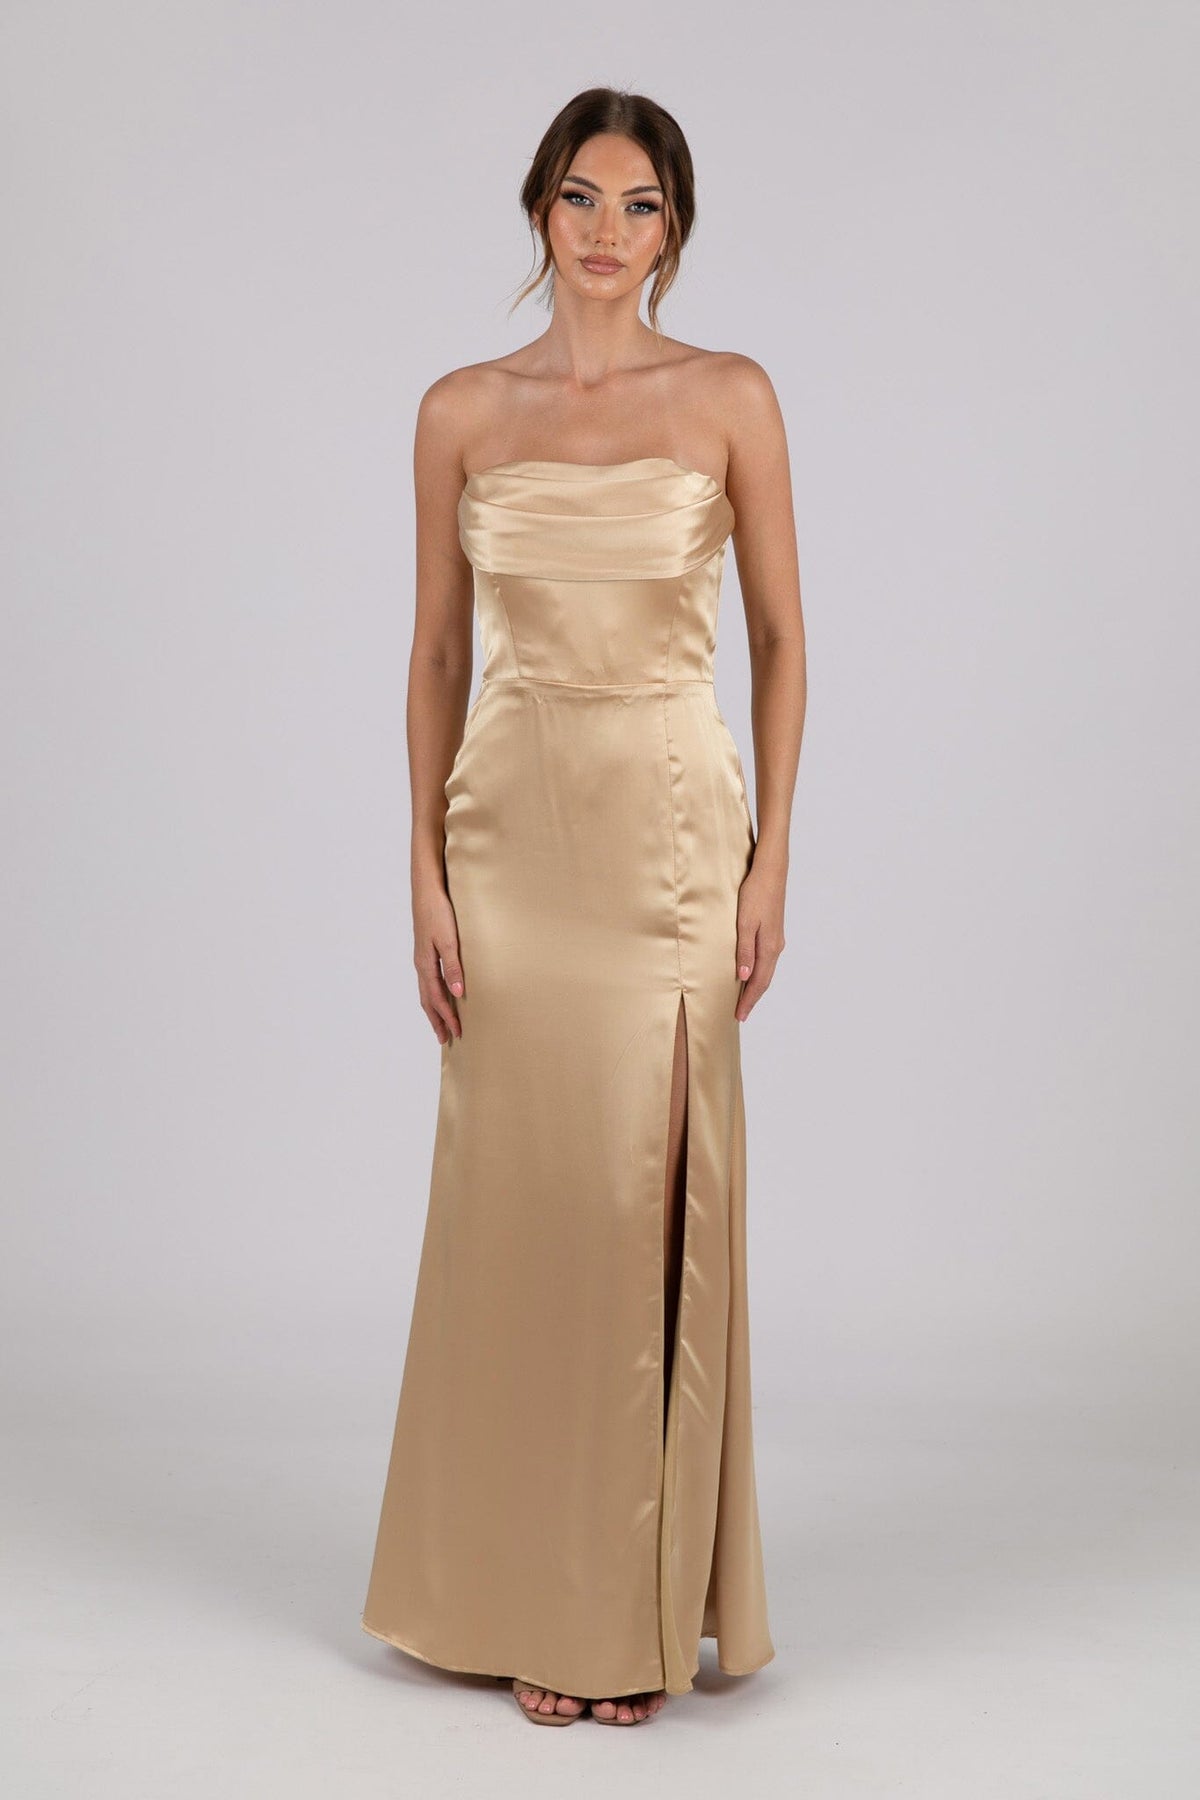 Full Frontal Image of Neutral Gold Champagne Coloured Strapless Satin Maxi Dress with Draped Detail at Bust and Side Slit